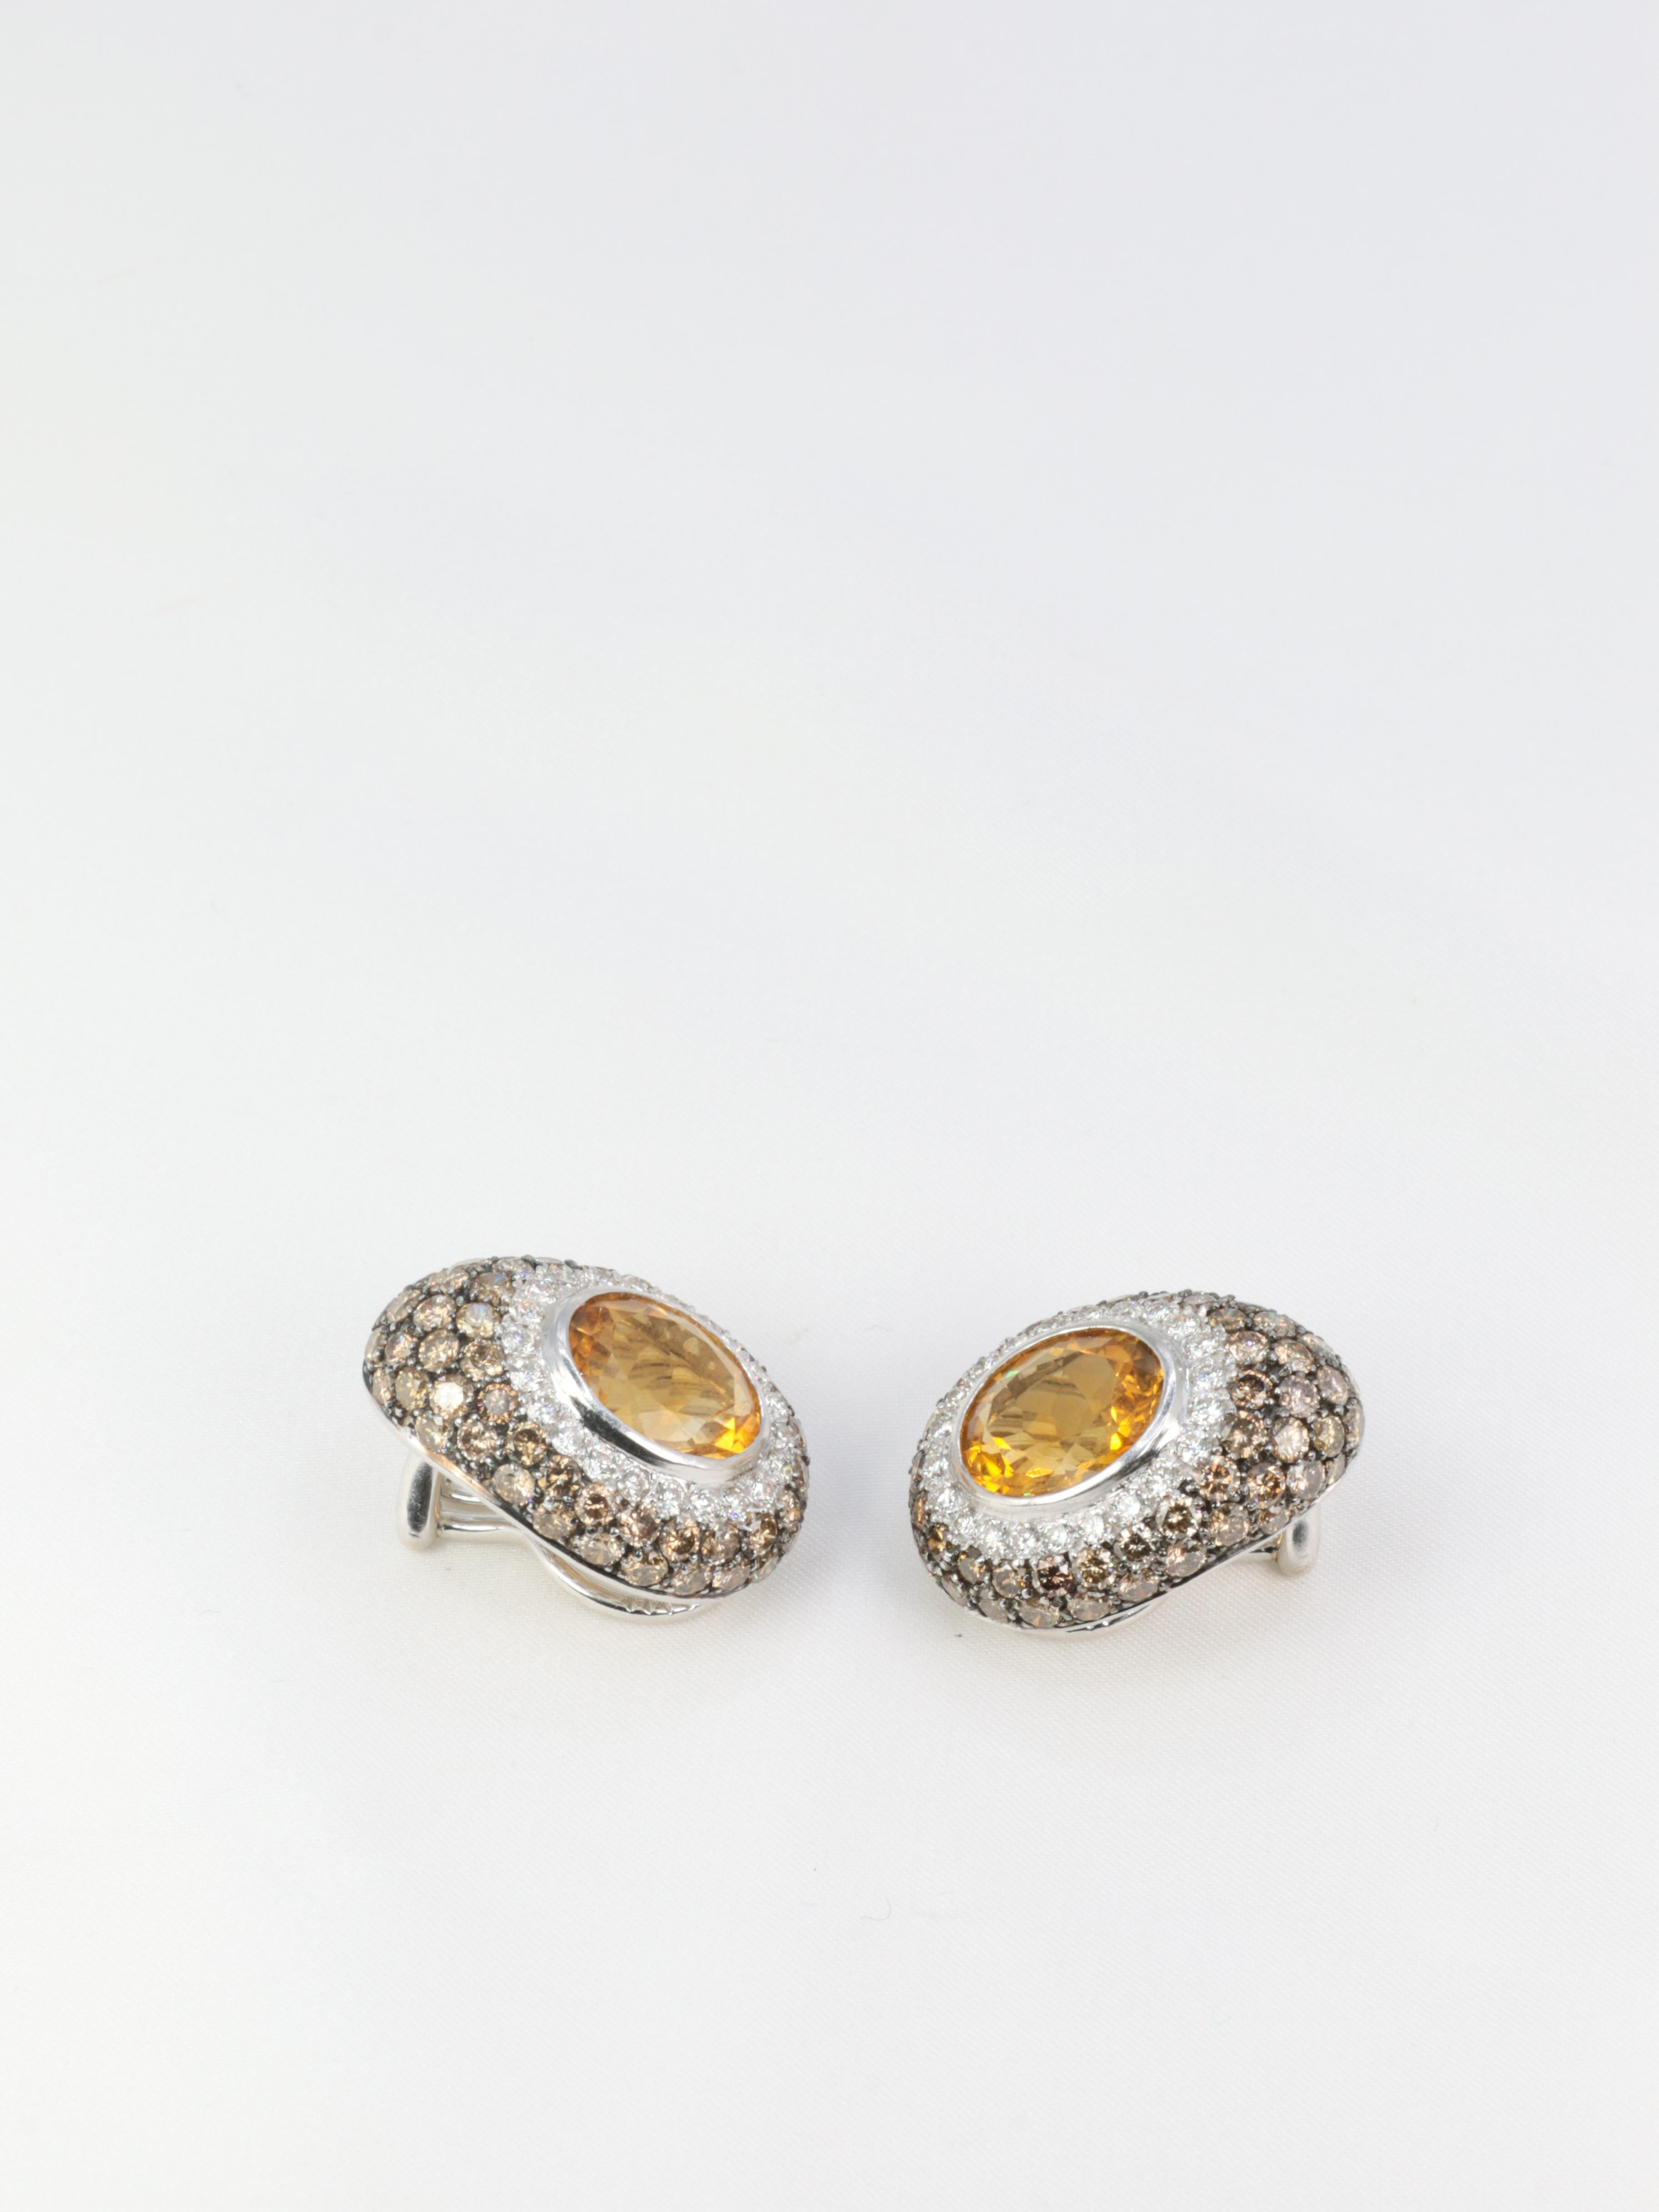 Pair of Gold, Citrines, White and Champagne Diamonds Earrings For Sale 4